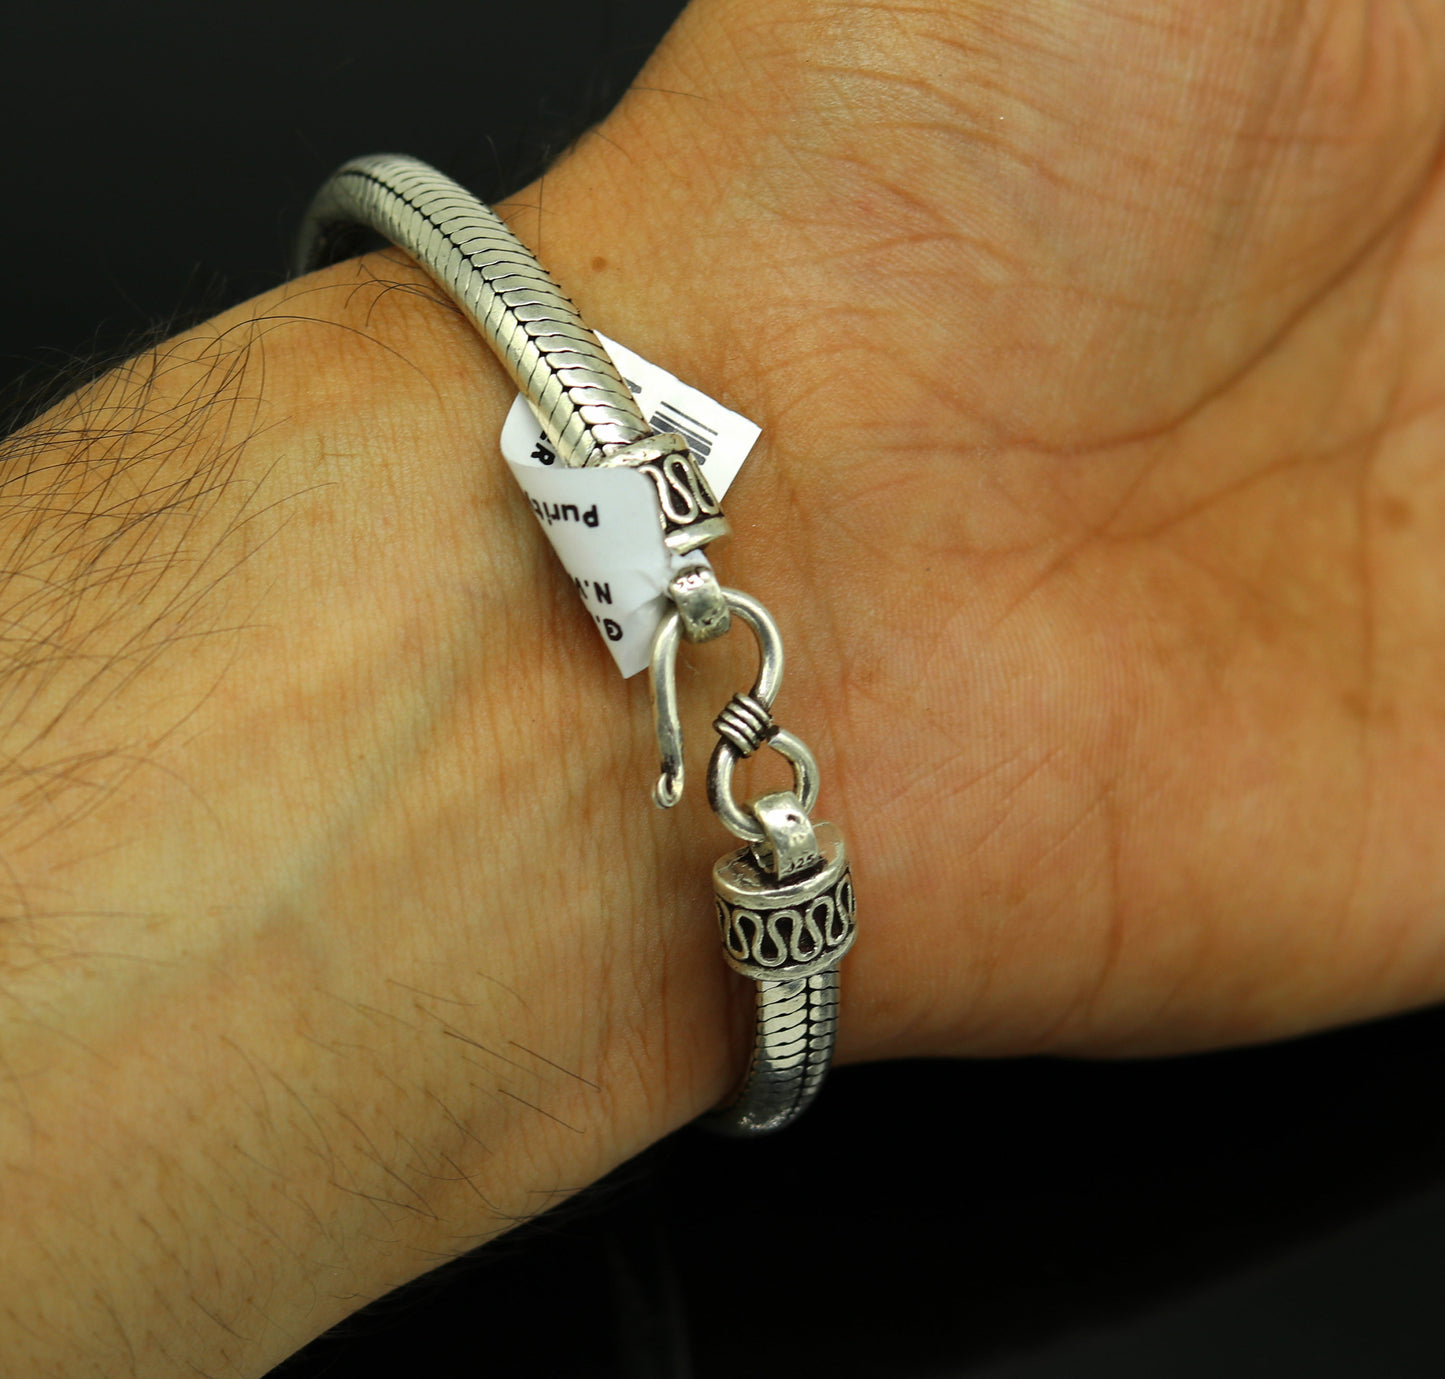 8.2" long 925 sterling silver handmade solid customized vintage design snake chain bracelet unisex personalized gift tribal jewelry nsbr33 - TRIBAL ORNAMENTS